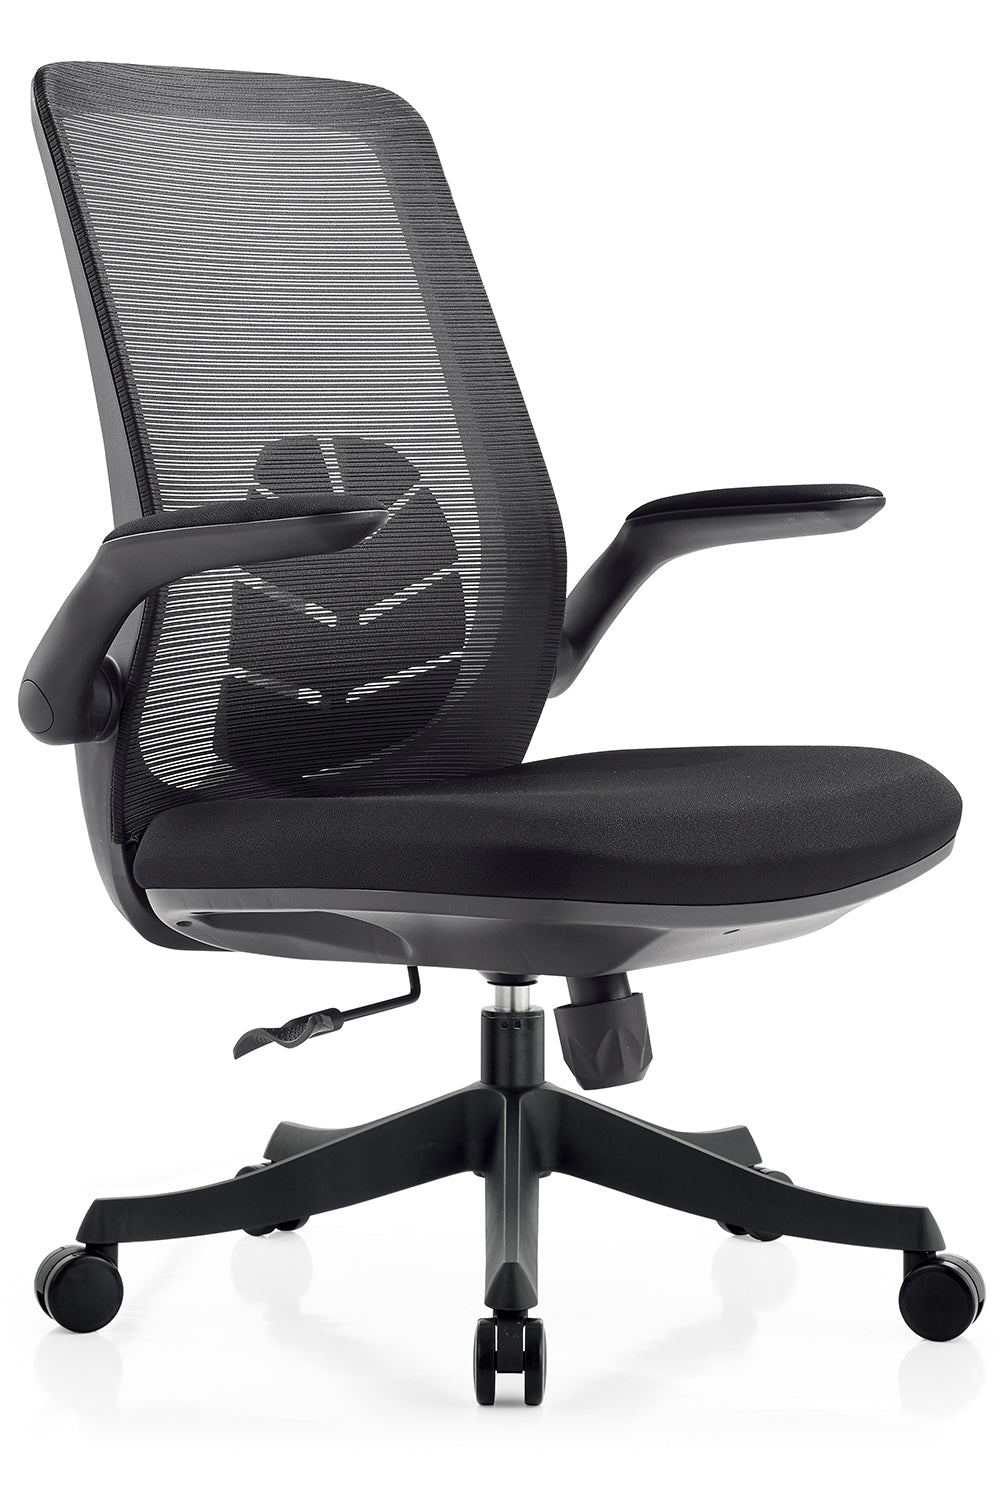 Noel Executive Mid Back Office Chair with Nylon Base - Black